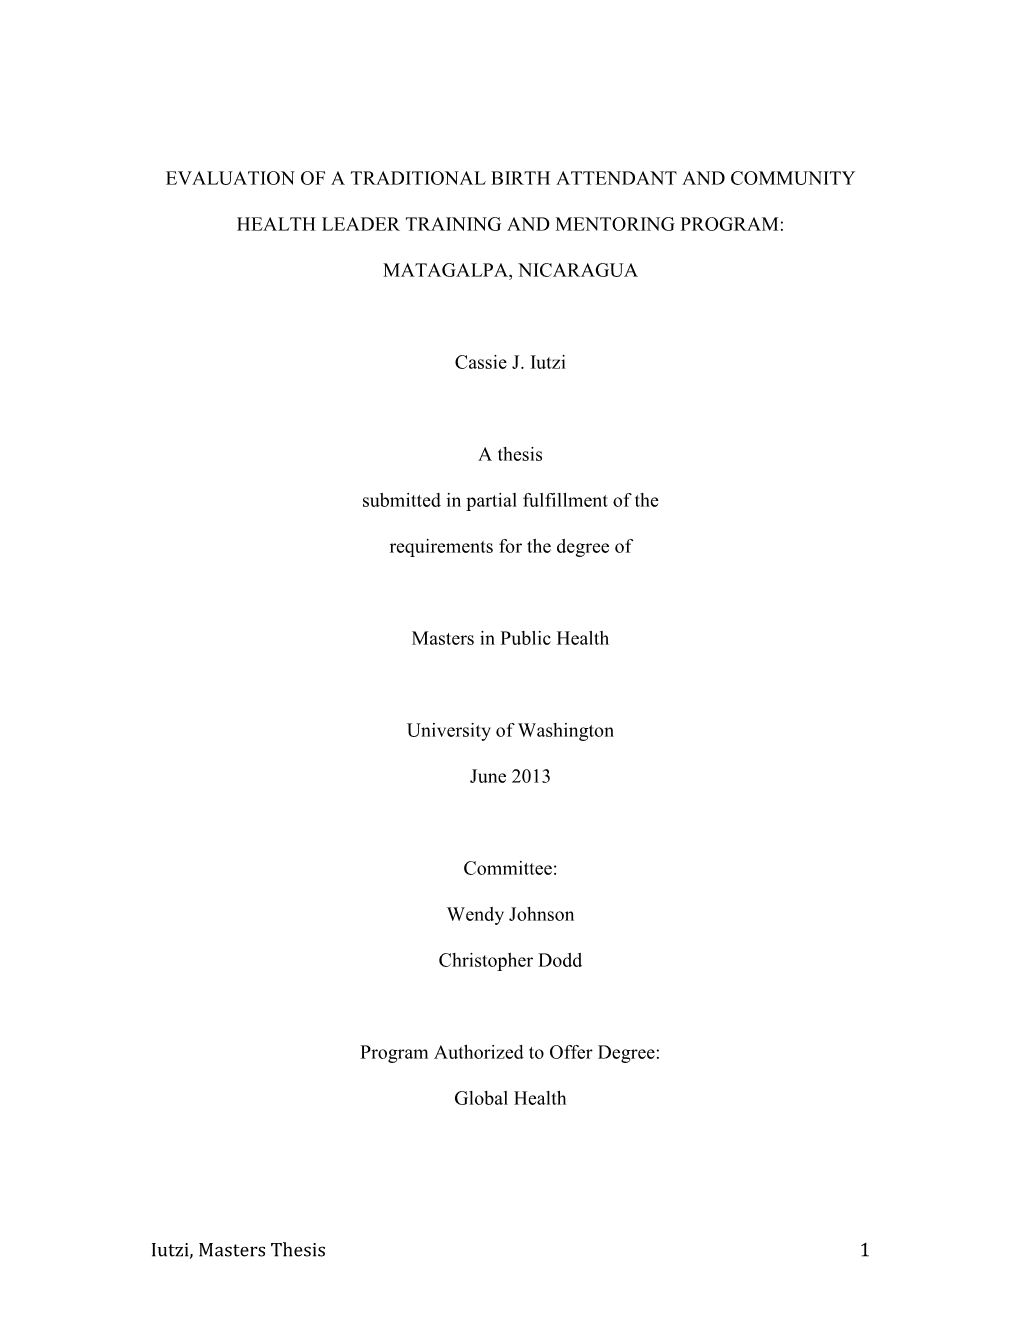 Iutzi, Masters Thesis 1 EVALUATION of A